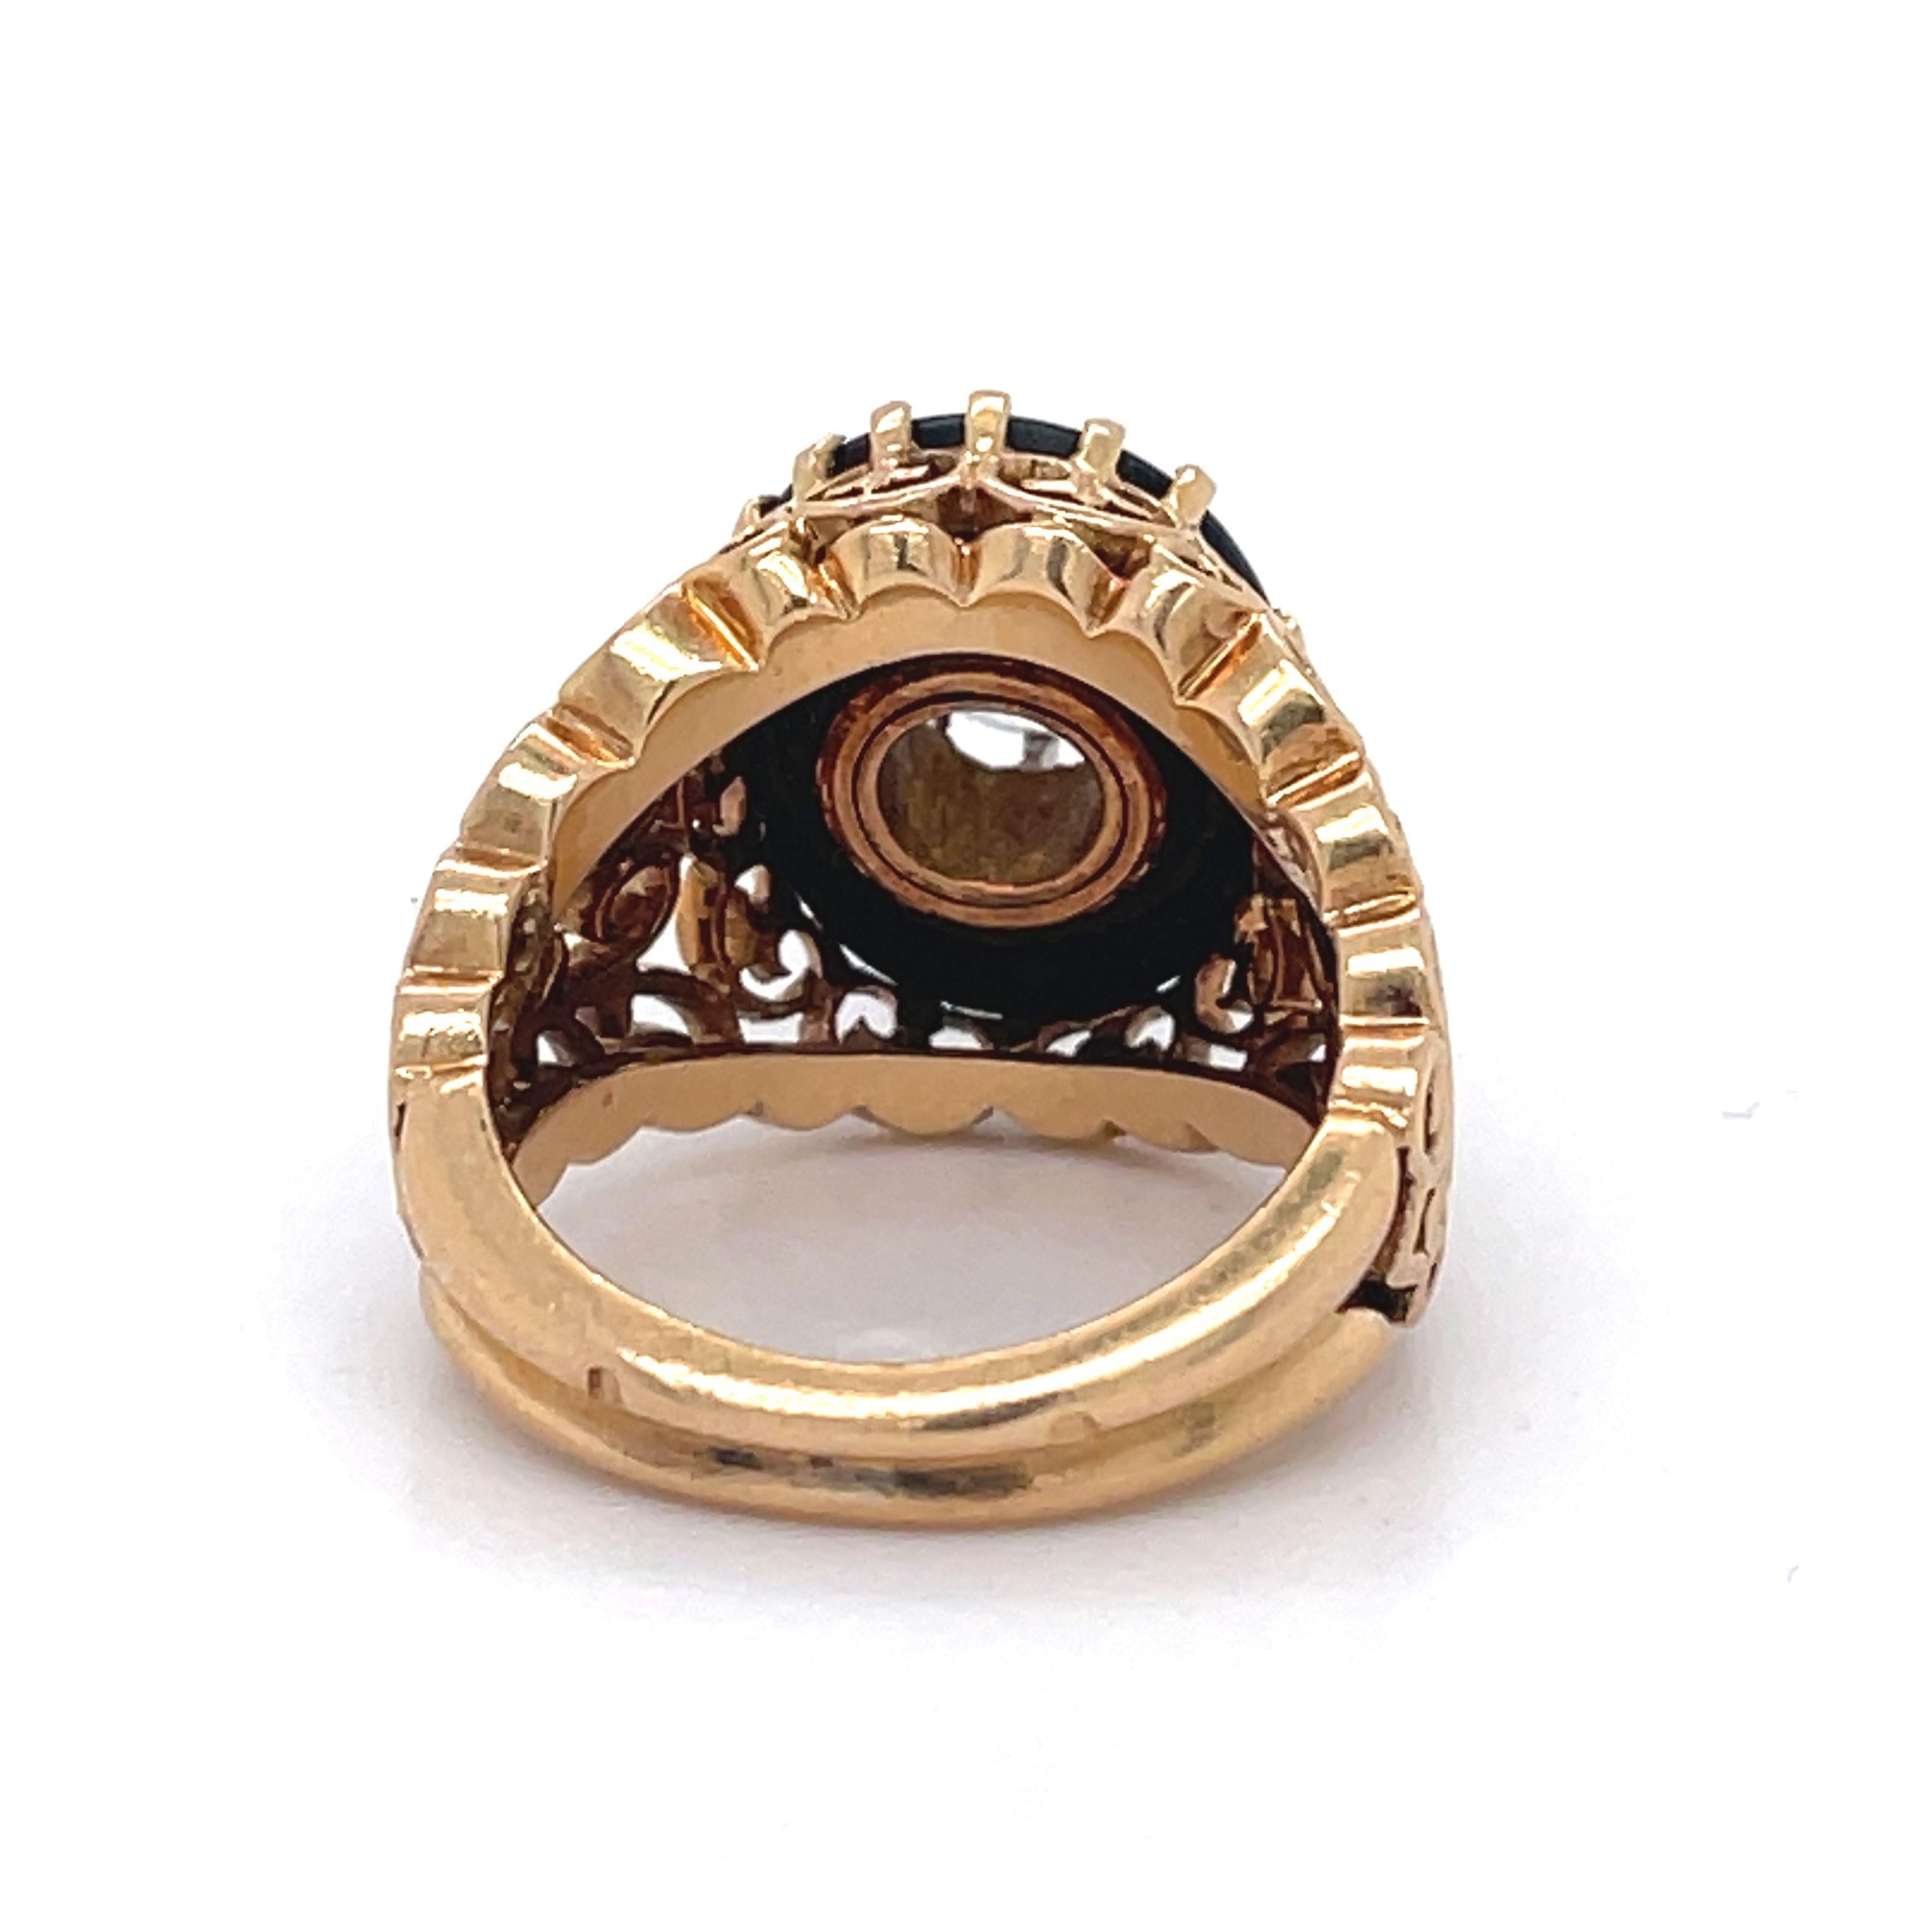 Filigree Ring- Vintage Onyx and Diamond Ring, 1ct Round Diamond, 18k Yellow Gold In Excellent Condition For Sale In Ramat Gan, IL